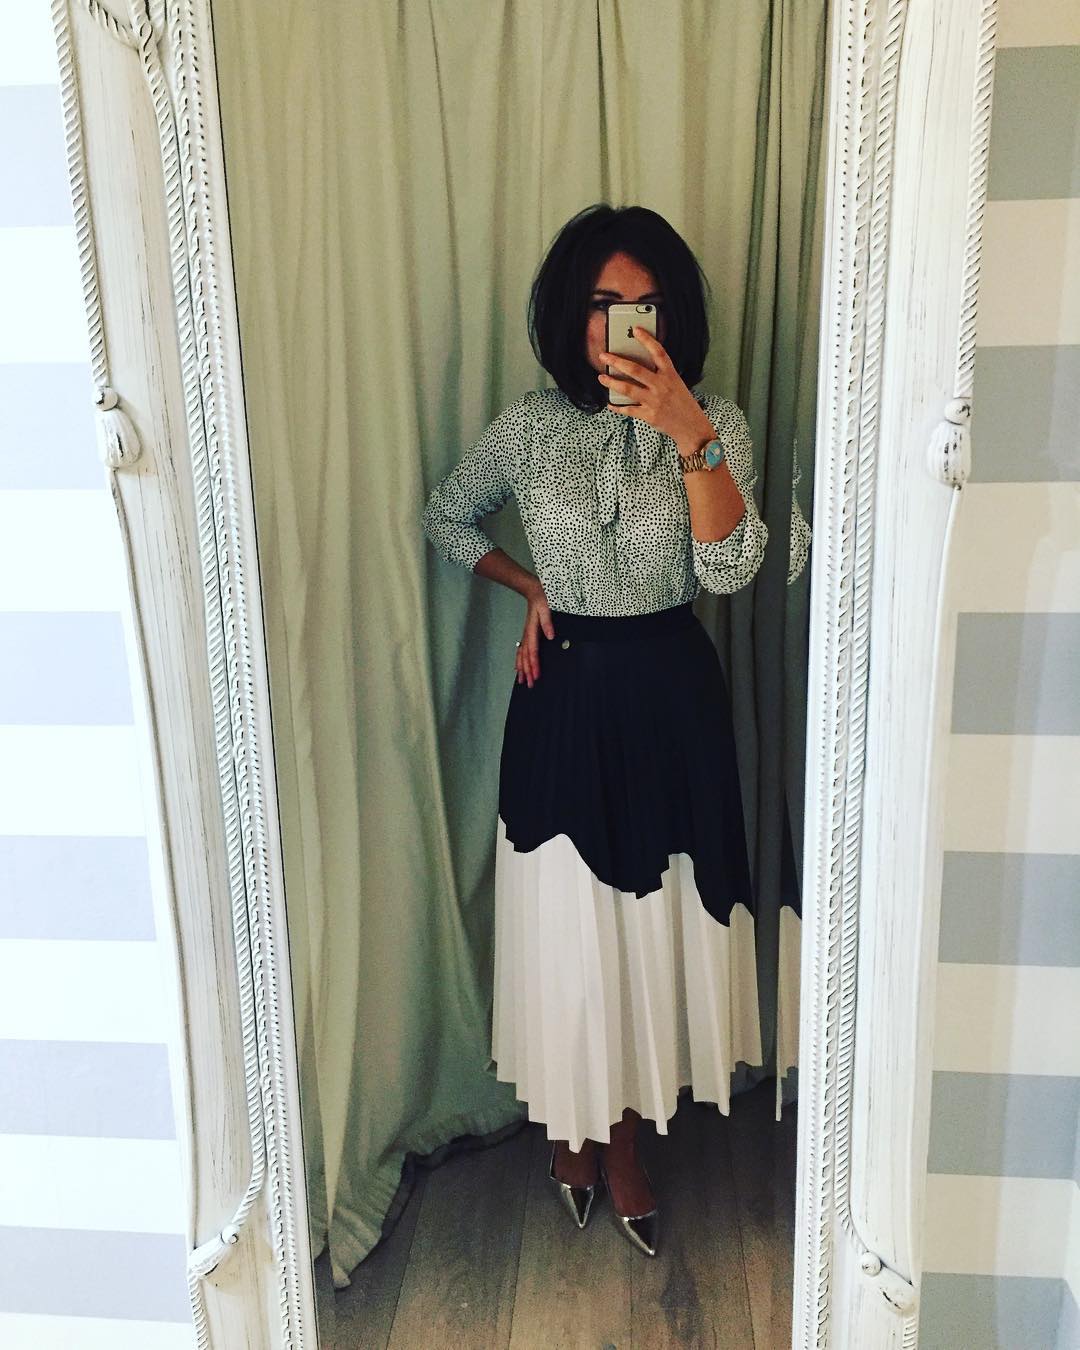 10 Midi Skirts to Swoon Over